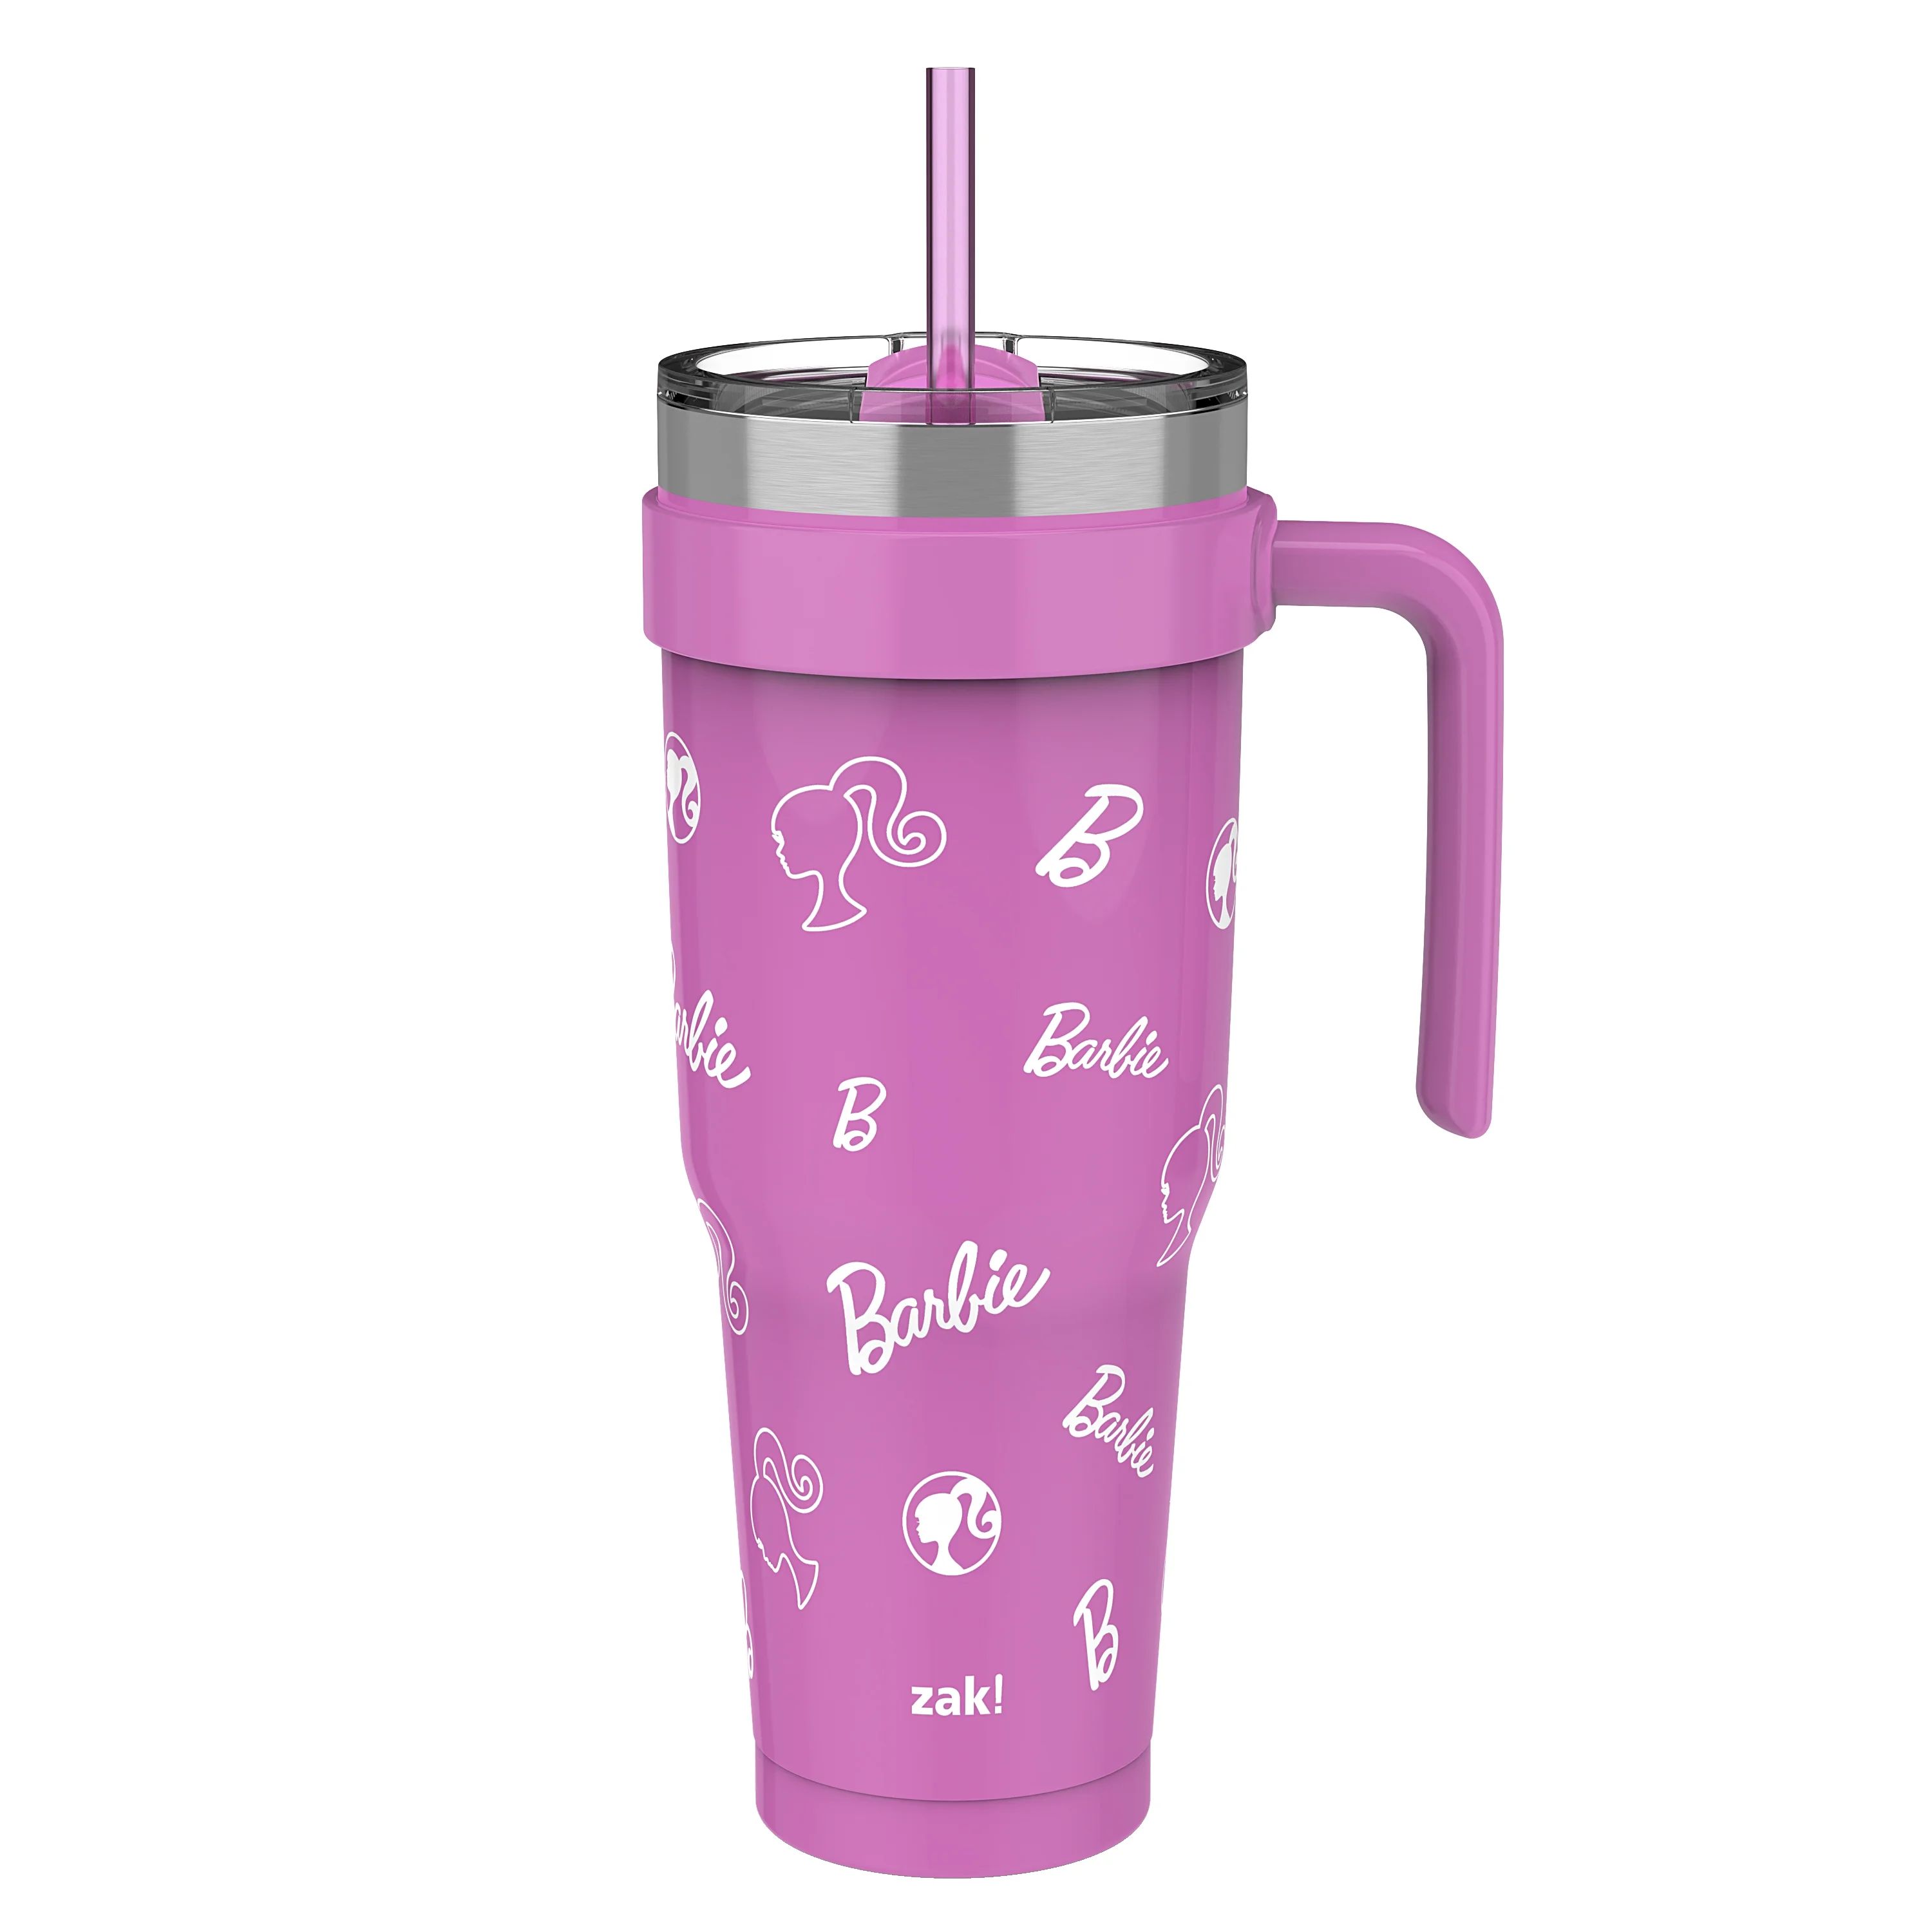 Barbie 40oz Double Wall Stainless Steel Waverly Tumbler - Pink | Walmart (US)